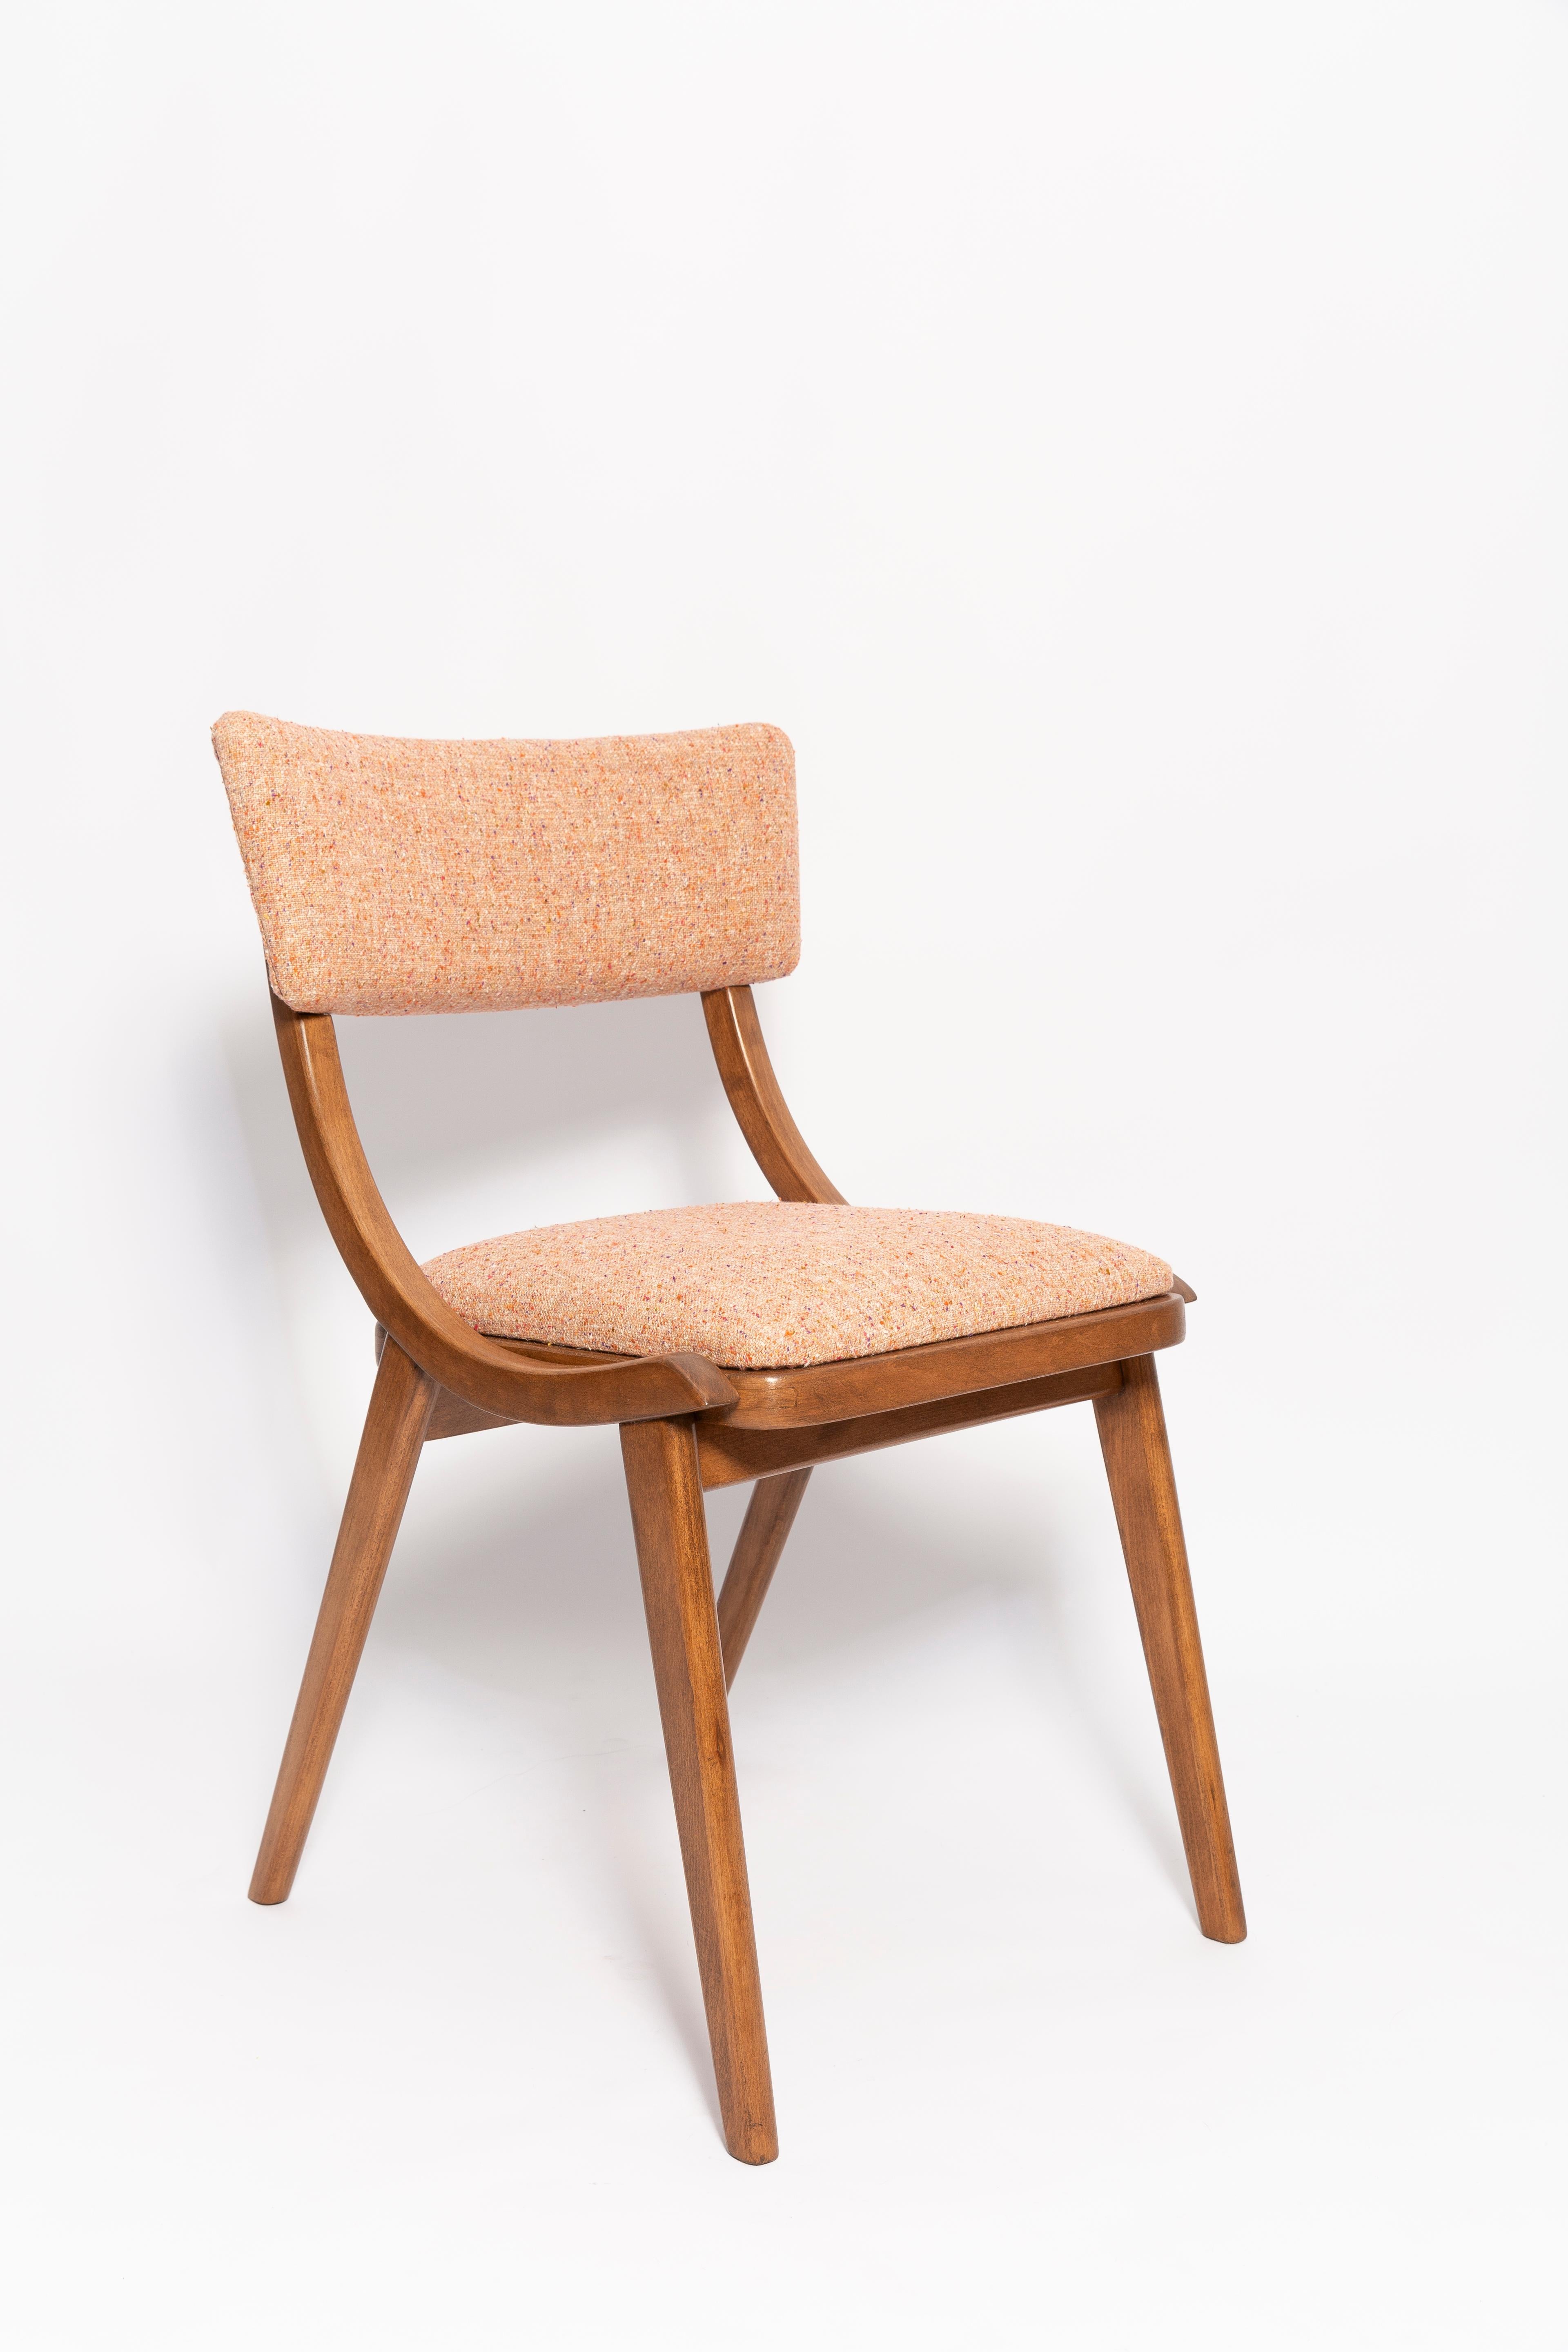 Chair designed by Prof. Rajmund Halas. Made of beechwood. 

Chair is after a complete upholstery renovation, the woodwork has been refreshed. Seat is dressed in leopard, durable and pleasant to the touch unique italian wool fabric. 

Chair is stable